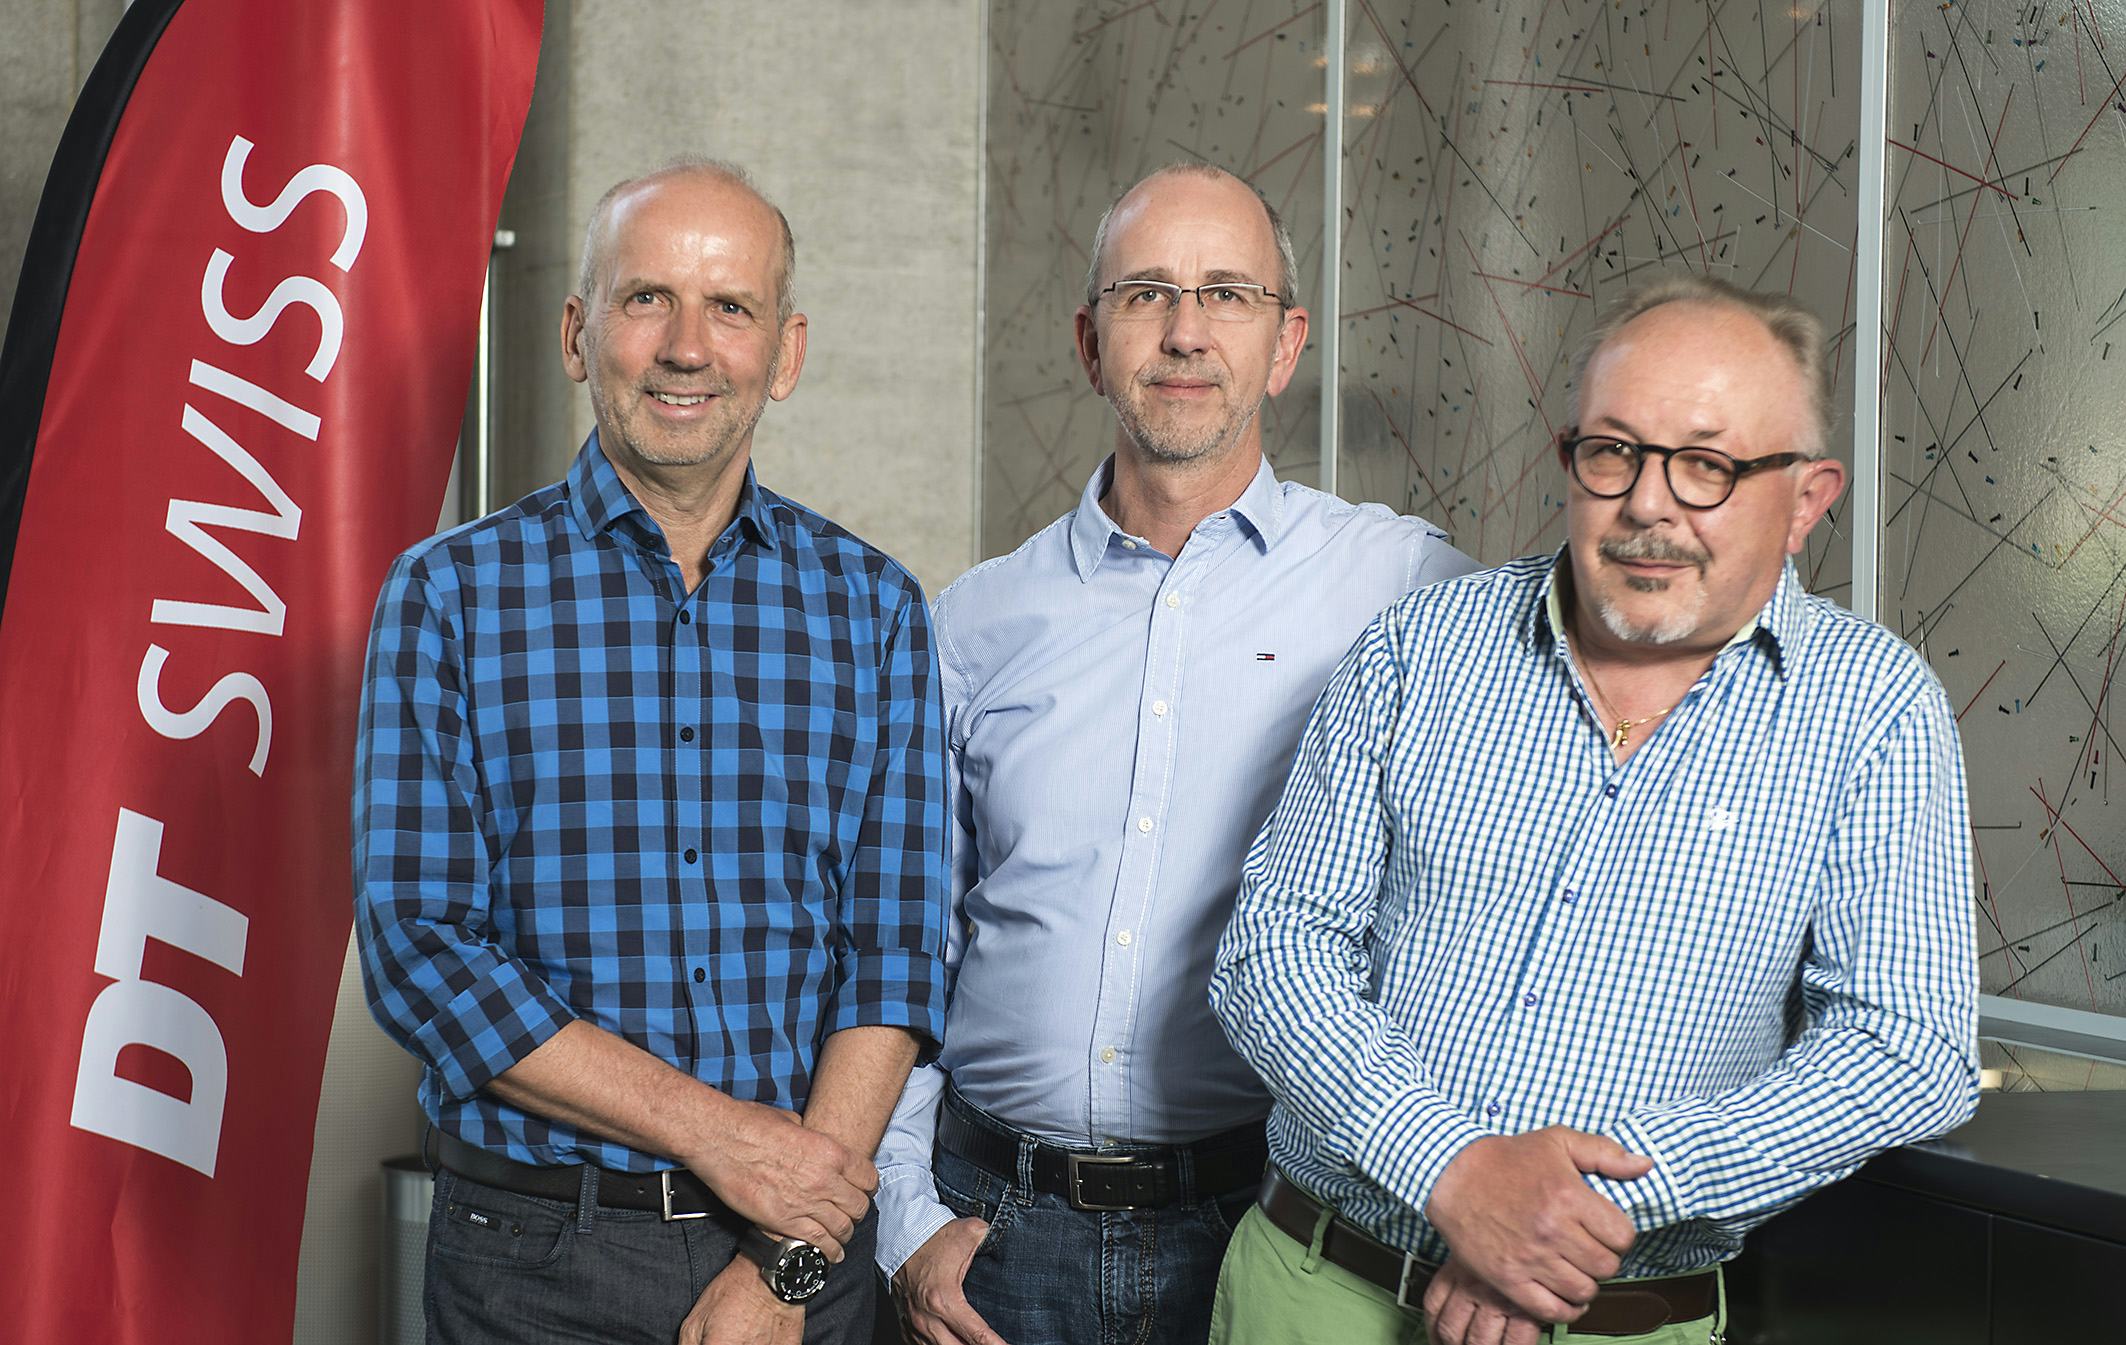 DT Swiss Group’s management team with (from left to right) Frank Böckmann, Marco Zingg and Maurizio D’Alberto. On July 1, 2015 Marco Zingg stops as CEO. – Photo DT Swiss